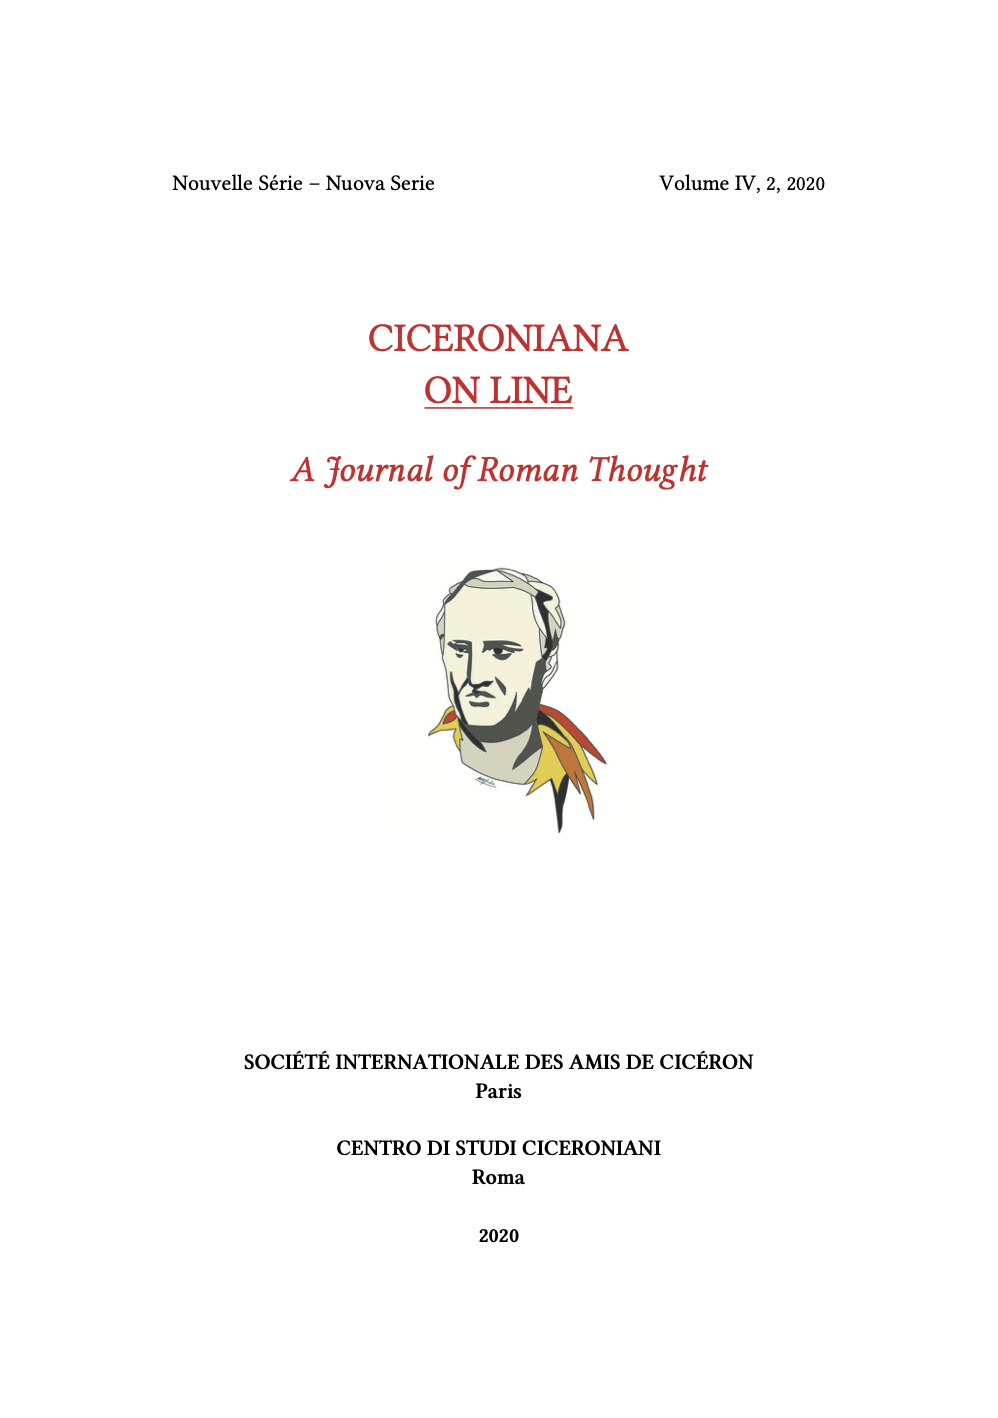 Book Cover: CICERONIANA ON LINE: Cicero, Society, and the Idea of artes liberales